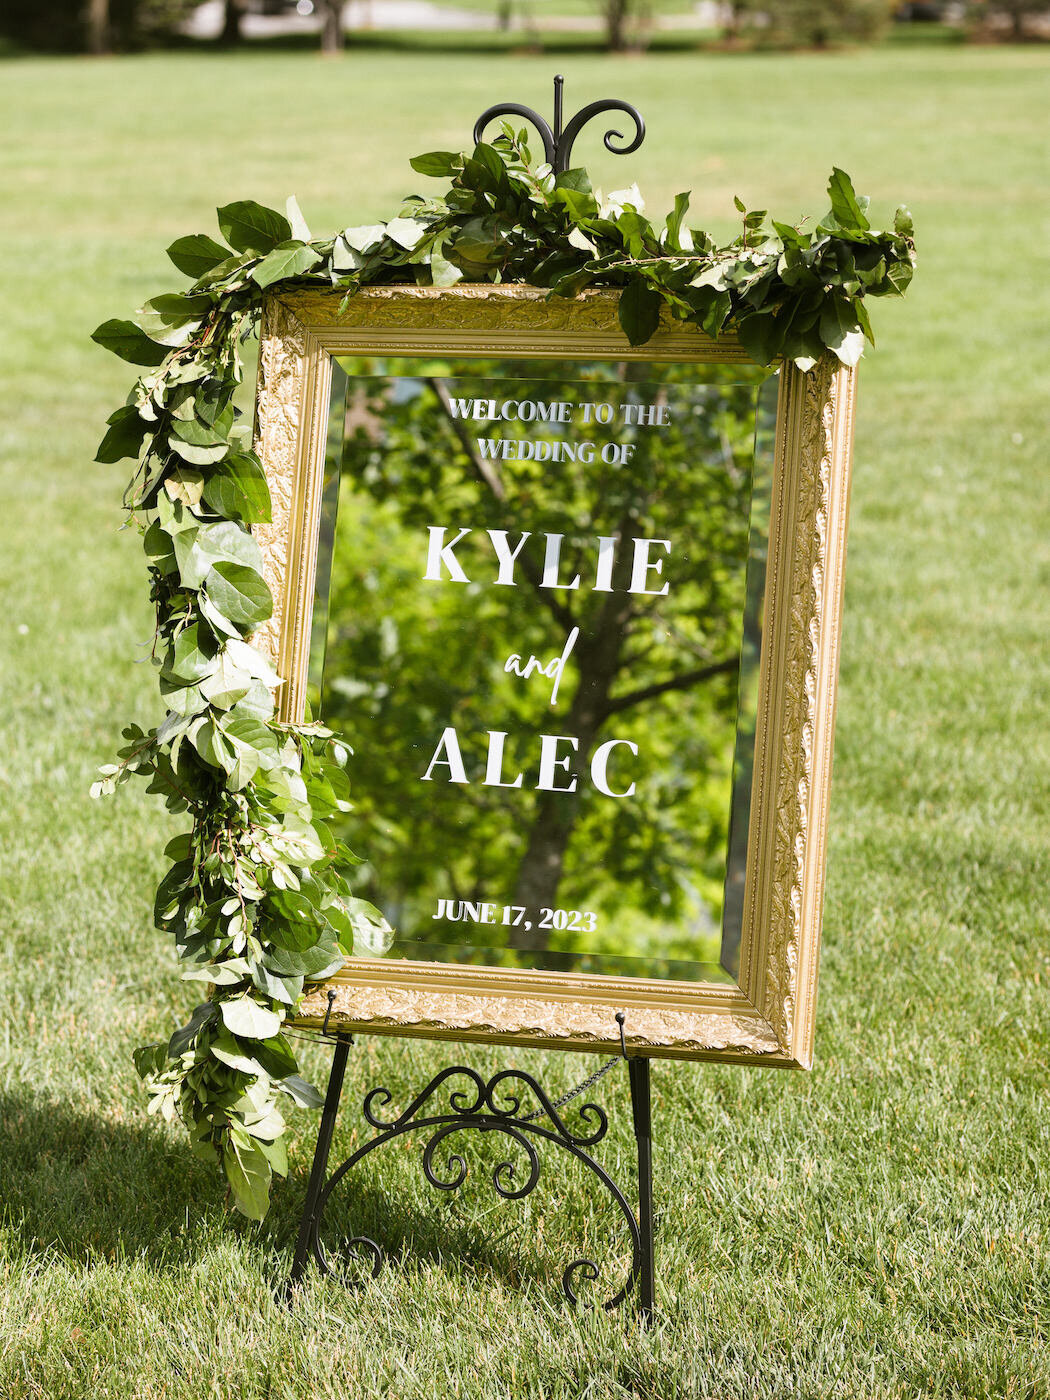 Lust for Life Event Planning and Wedding Design - Kylie and Alec The Empire Room -46